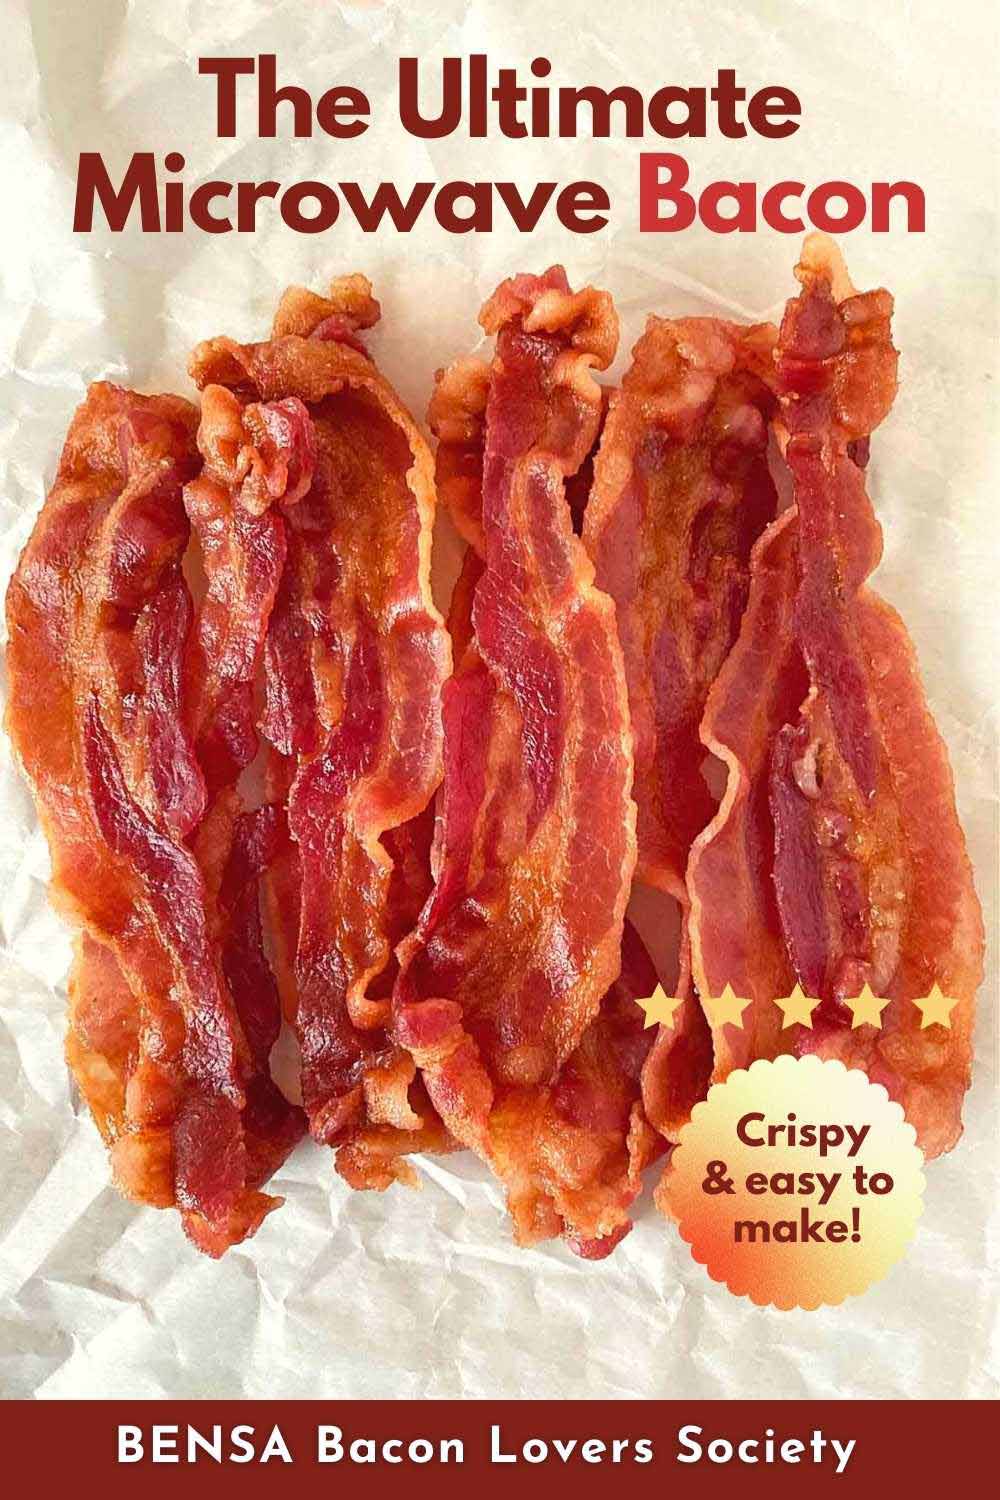 A pile of cooked microwave bacon on a piece of parchment paper.